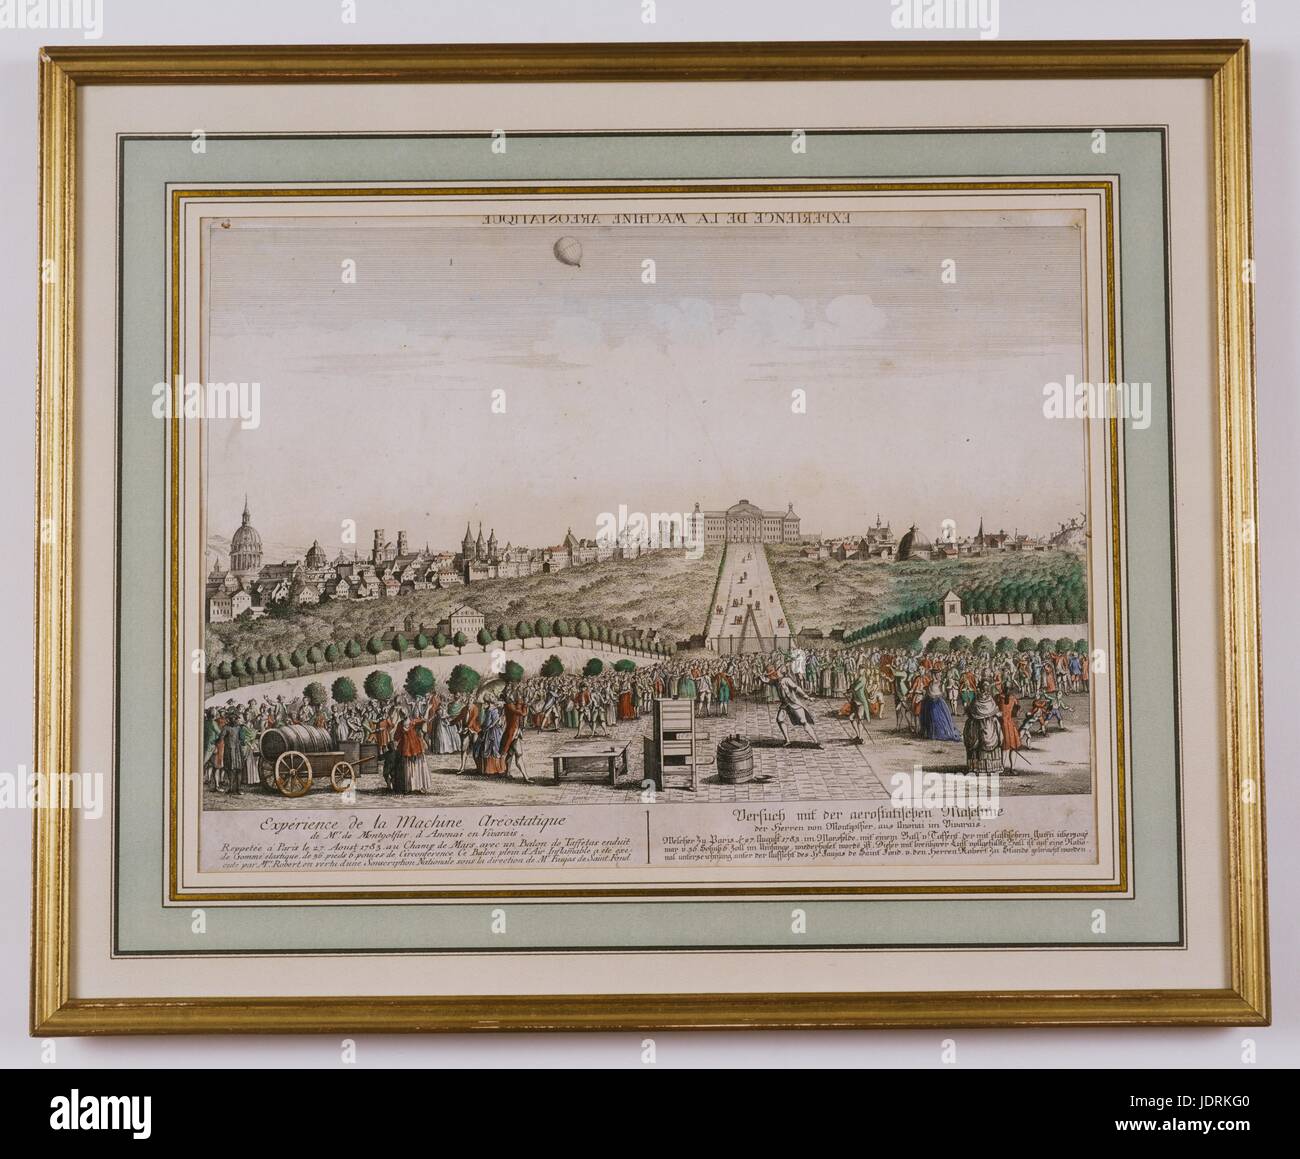 Aerostatic experiment of the Montgolfier brothers in Annonay, Vivarais   Repeated in Paris on 27th August 1783 in the Champ de Mars  Coloured etching with frame (43 x 53 cm)  Muller-Quênot Collection The experiment involved a taffeta balloon coated with elastic rubber 36ft and 6in in circumference. The flight of this balloon, filled with ignitable air, was carried out by Robert after being granted national funding following its approval by Mr Faujas de Saint Fond. Stock Photo